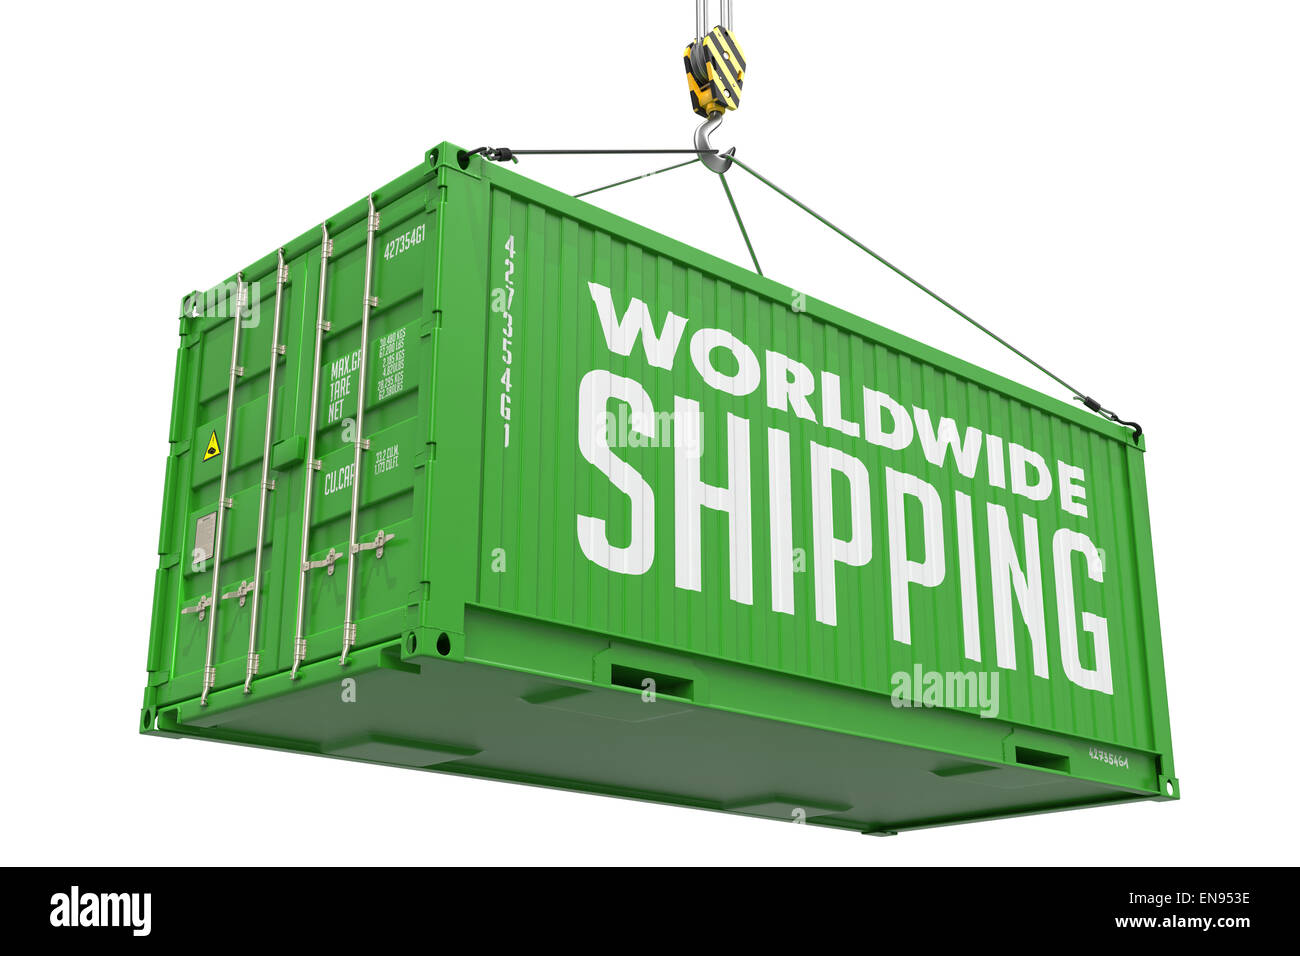 Worldwide Shipping- Green Hanging Cargo Container. Stock Photo